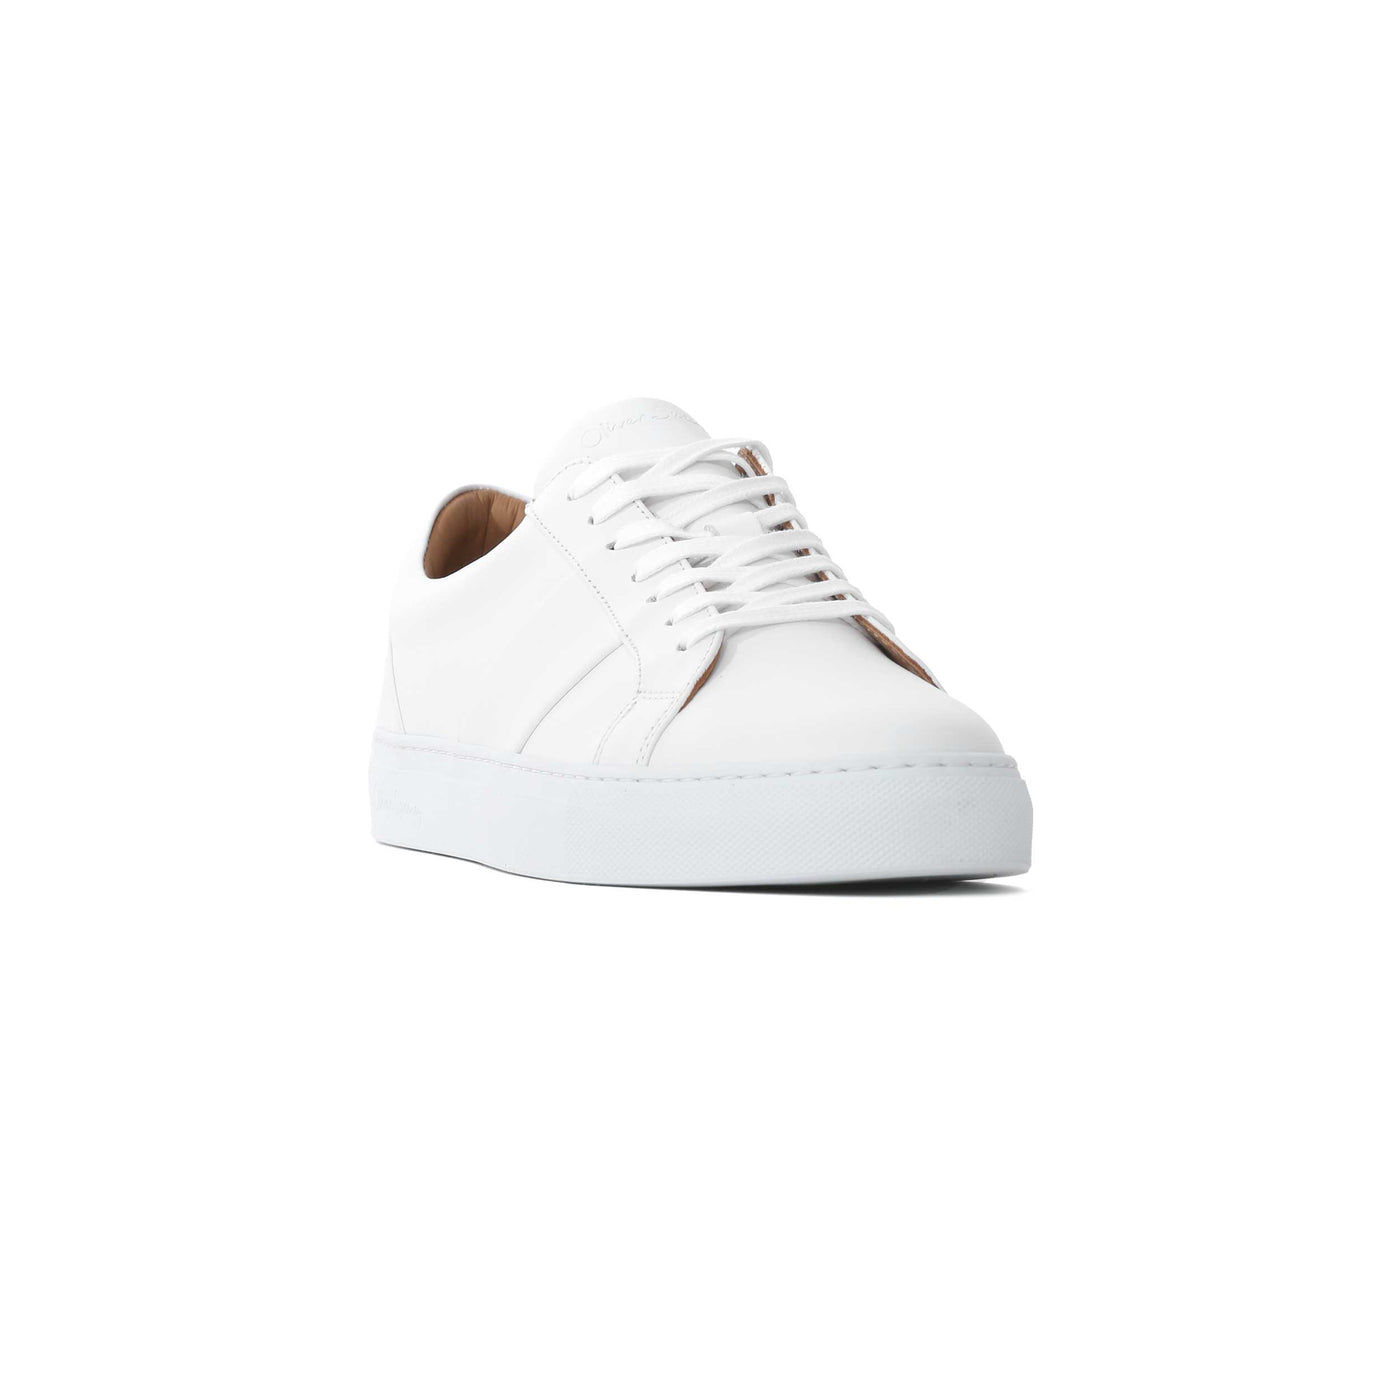 Oliver Sweeney Quintos Trainer in White Toe